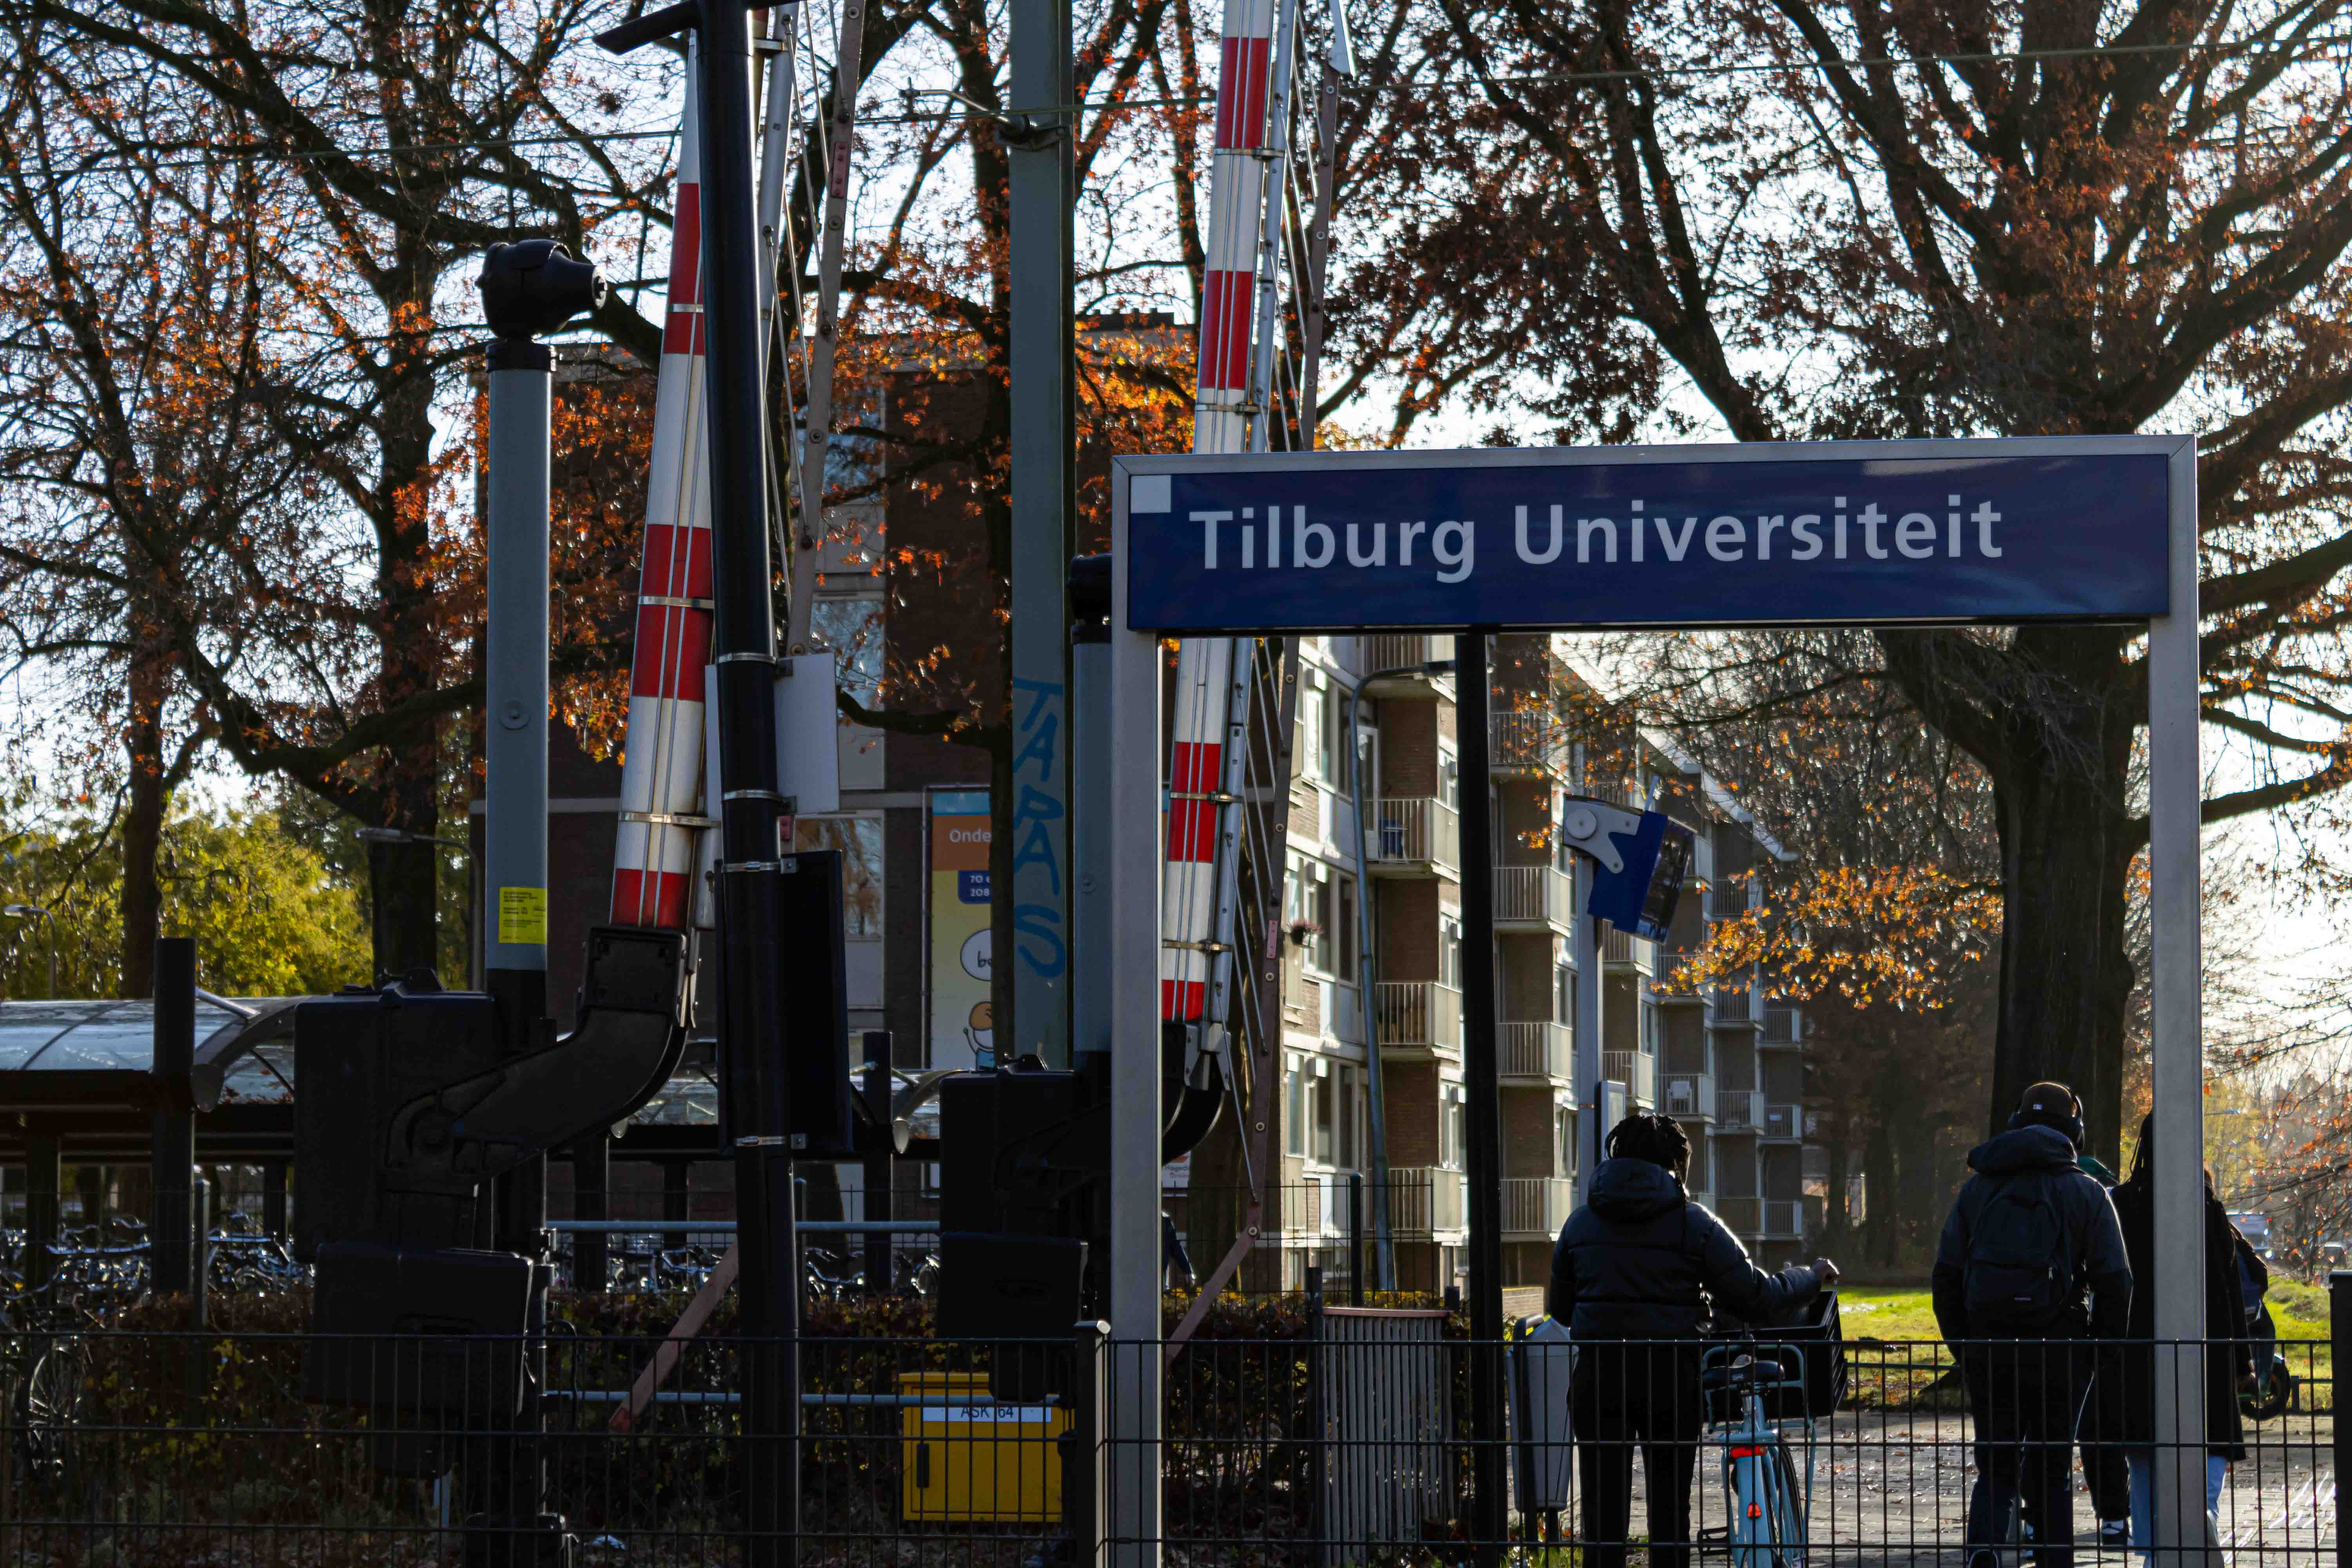 Tilburg University looks beyond the borders of its campus now